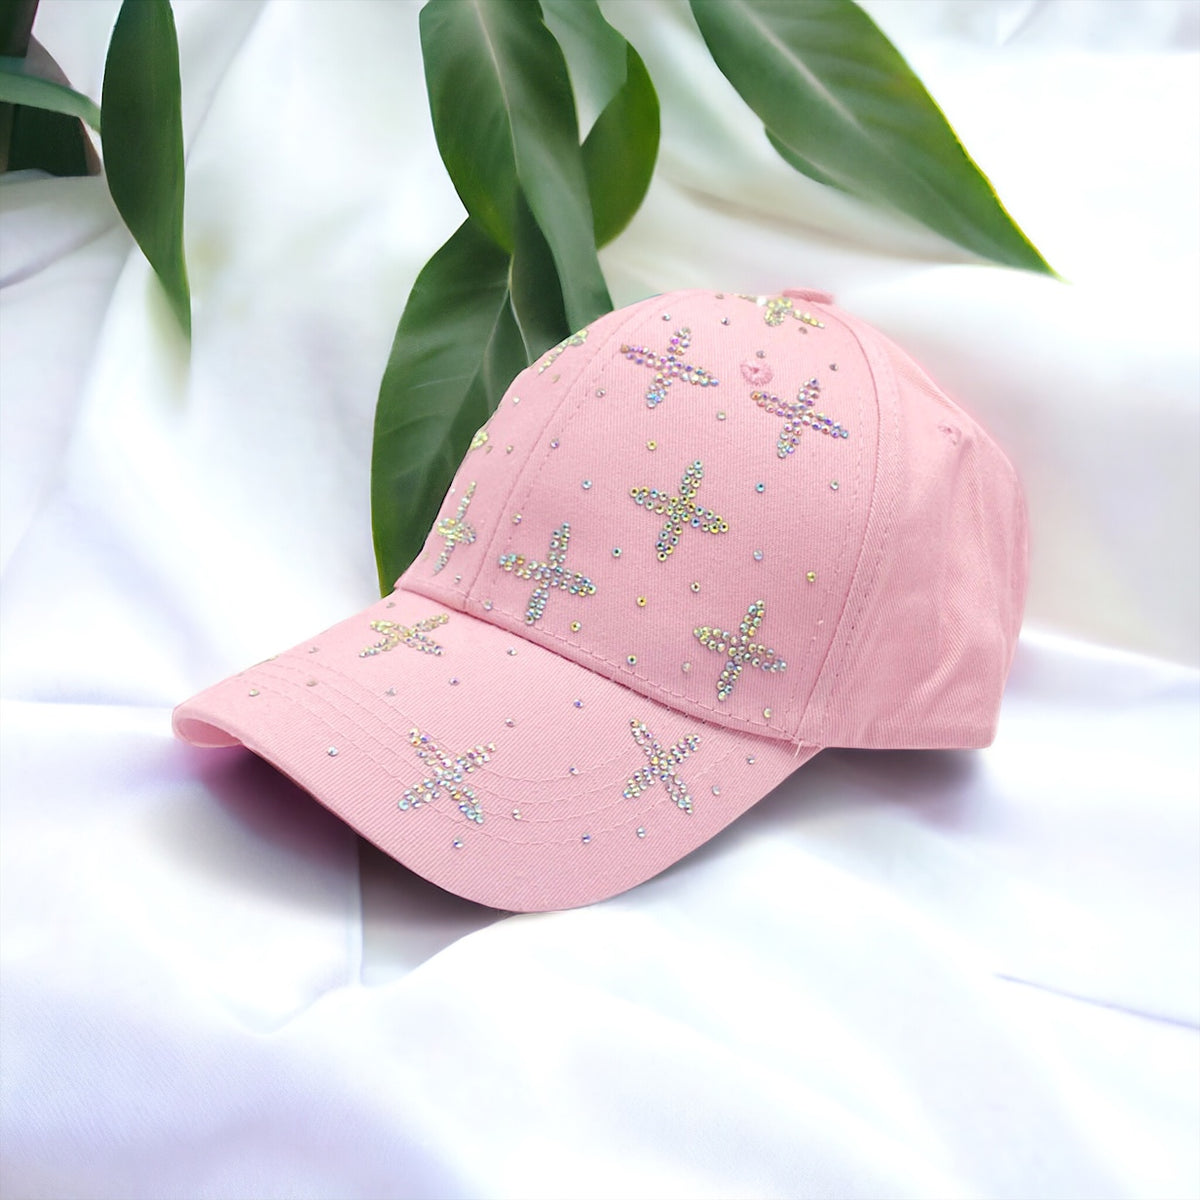 Bling Baseball Cap - Pink-260 Other Accessories-Wona Trading-Coastal Bloom Boutique, find the trendiest versions of the popular styles and looks Located in Indialantic, FL